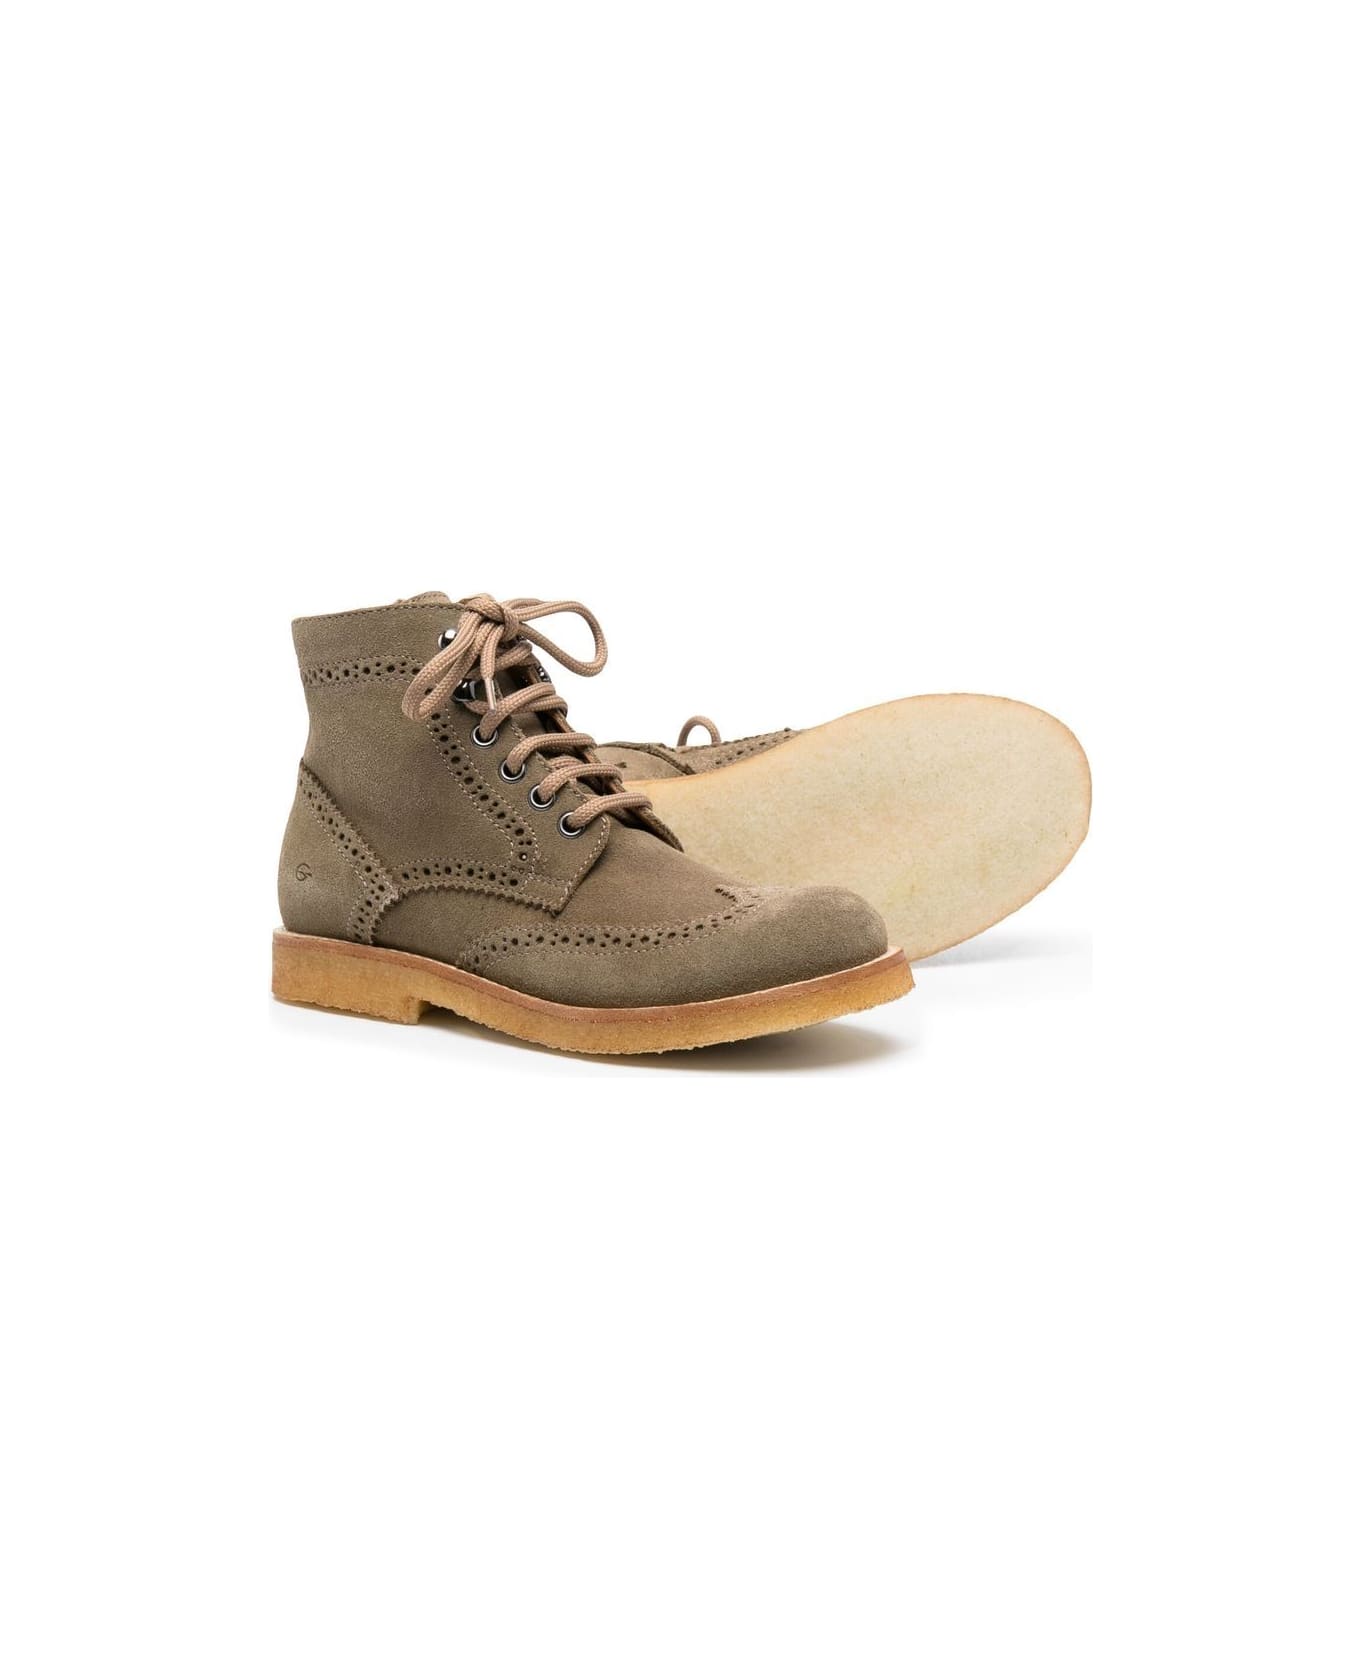 Gallucci Lace-up Suede Brogue Boots - Beige